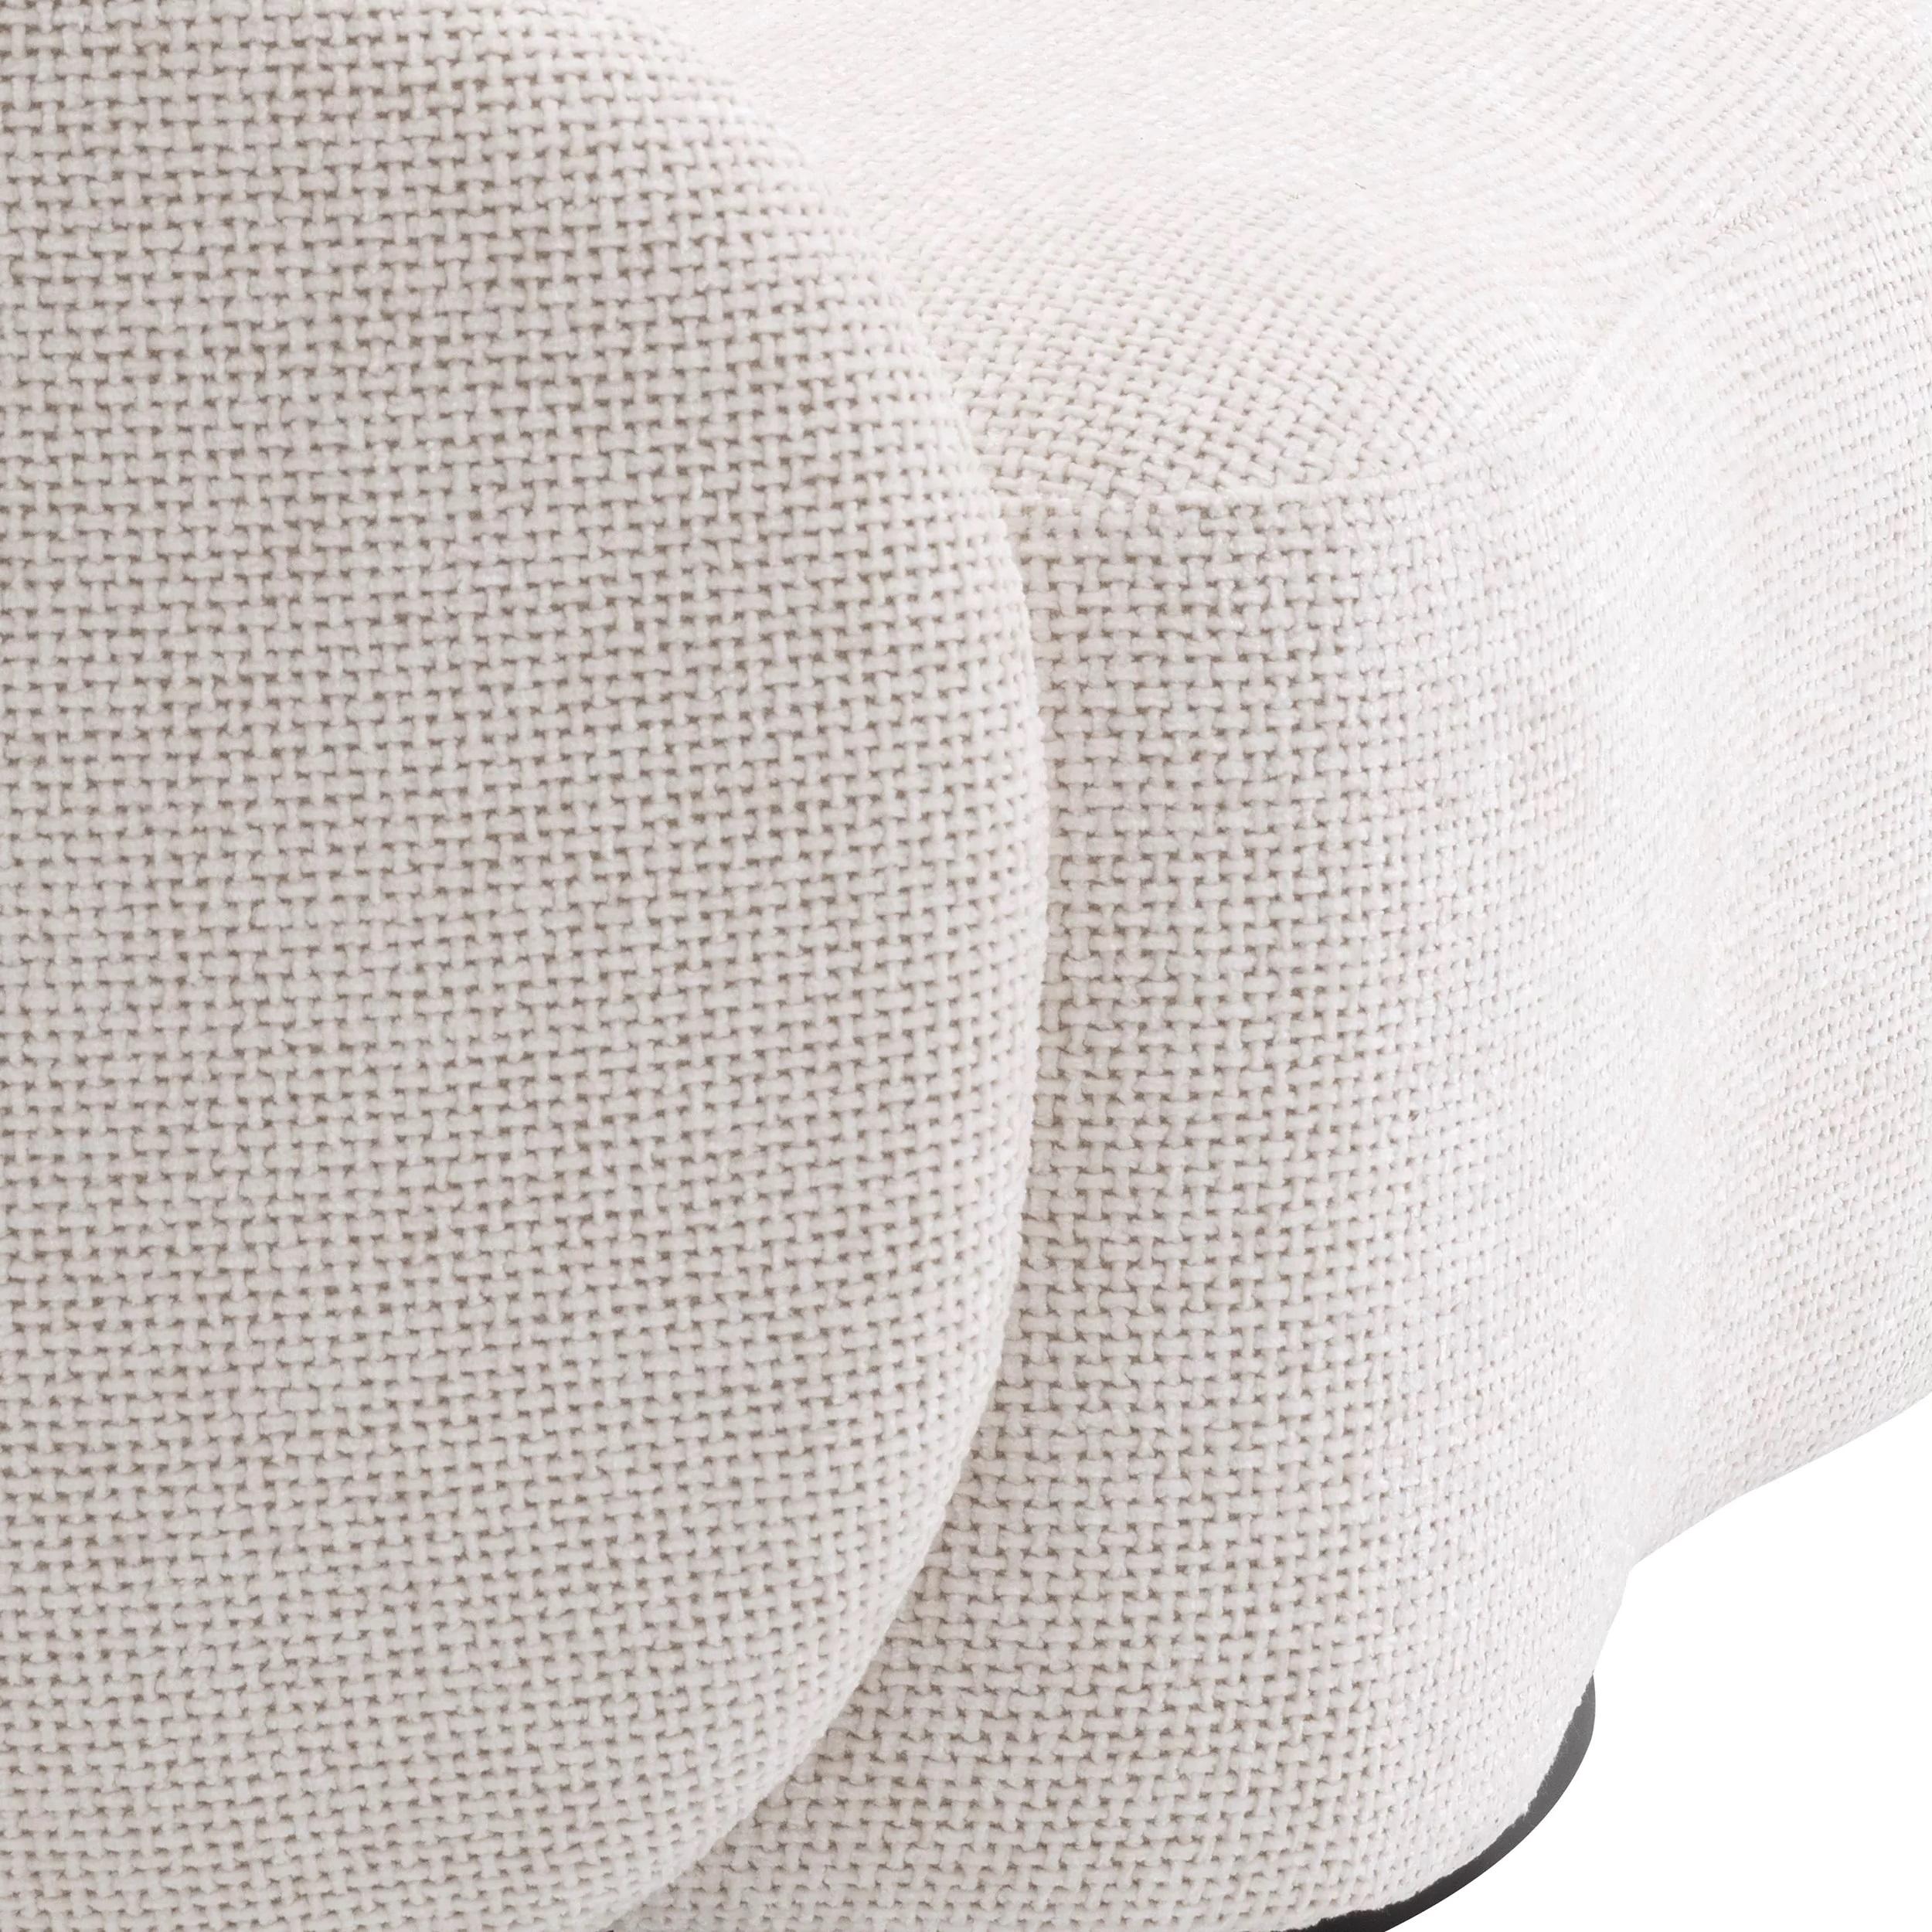 Welcoming and curved swivel armchair in an Art Deco Style, soft beige bouclé fabric with brass finishes base.